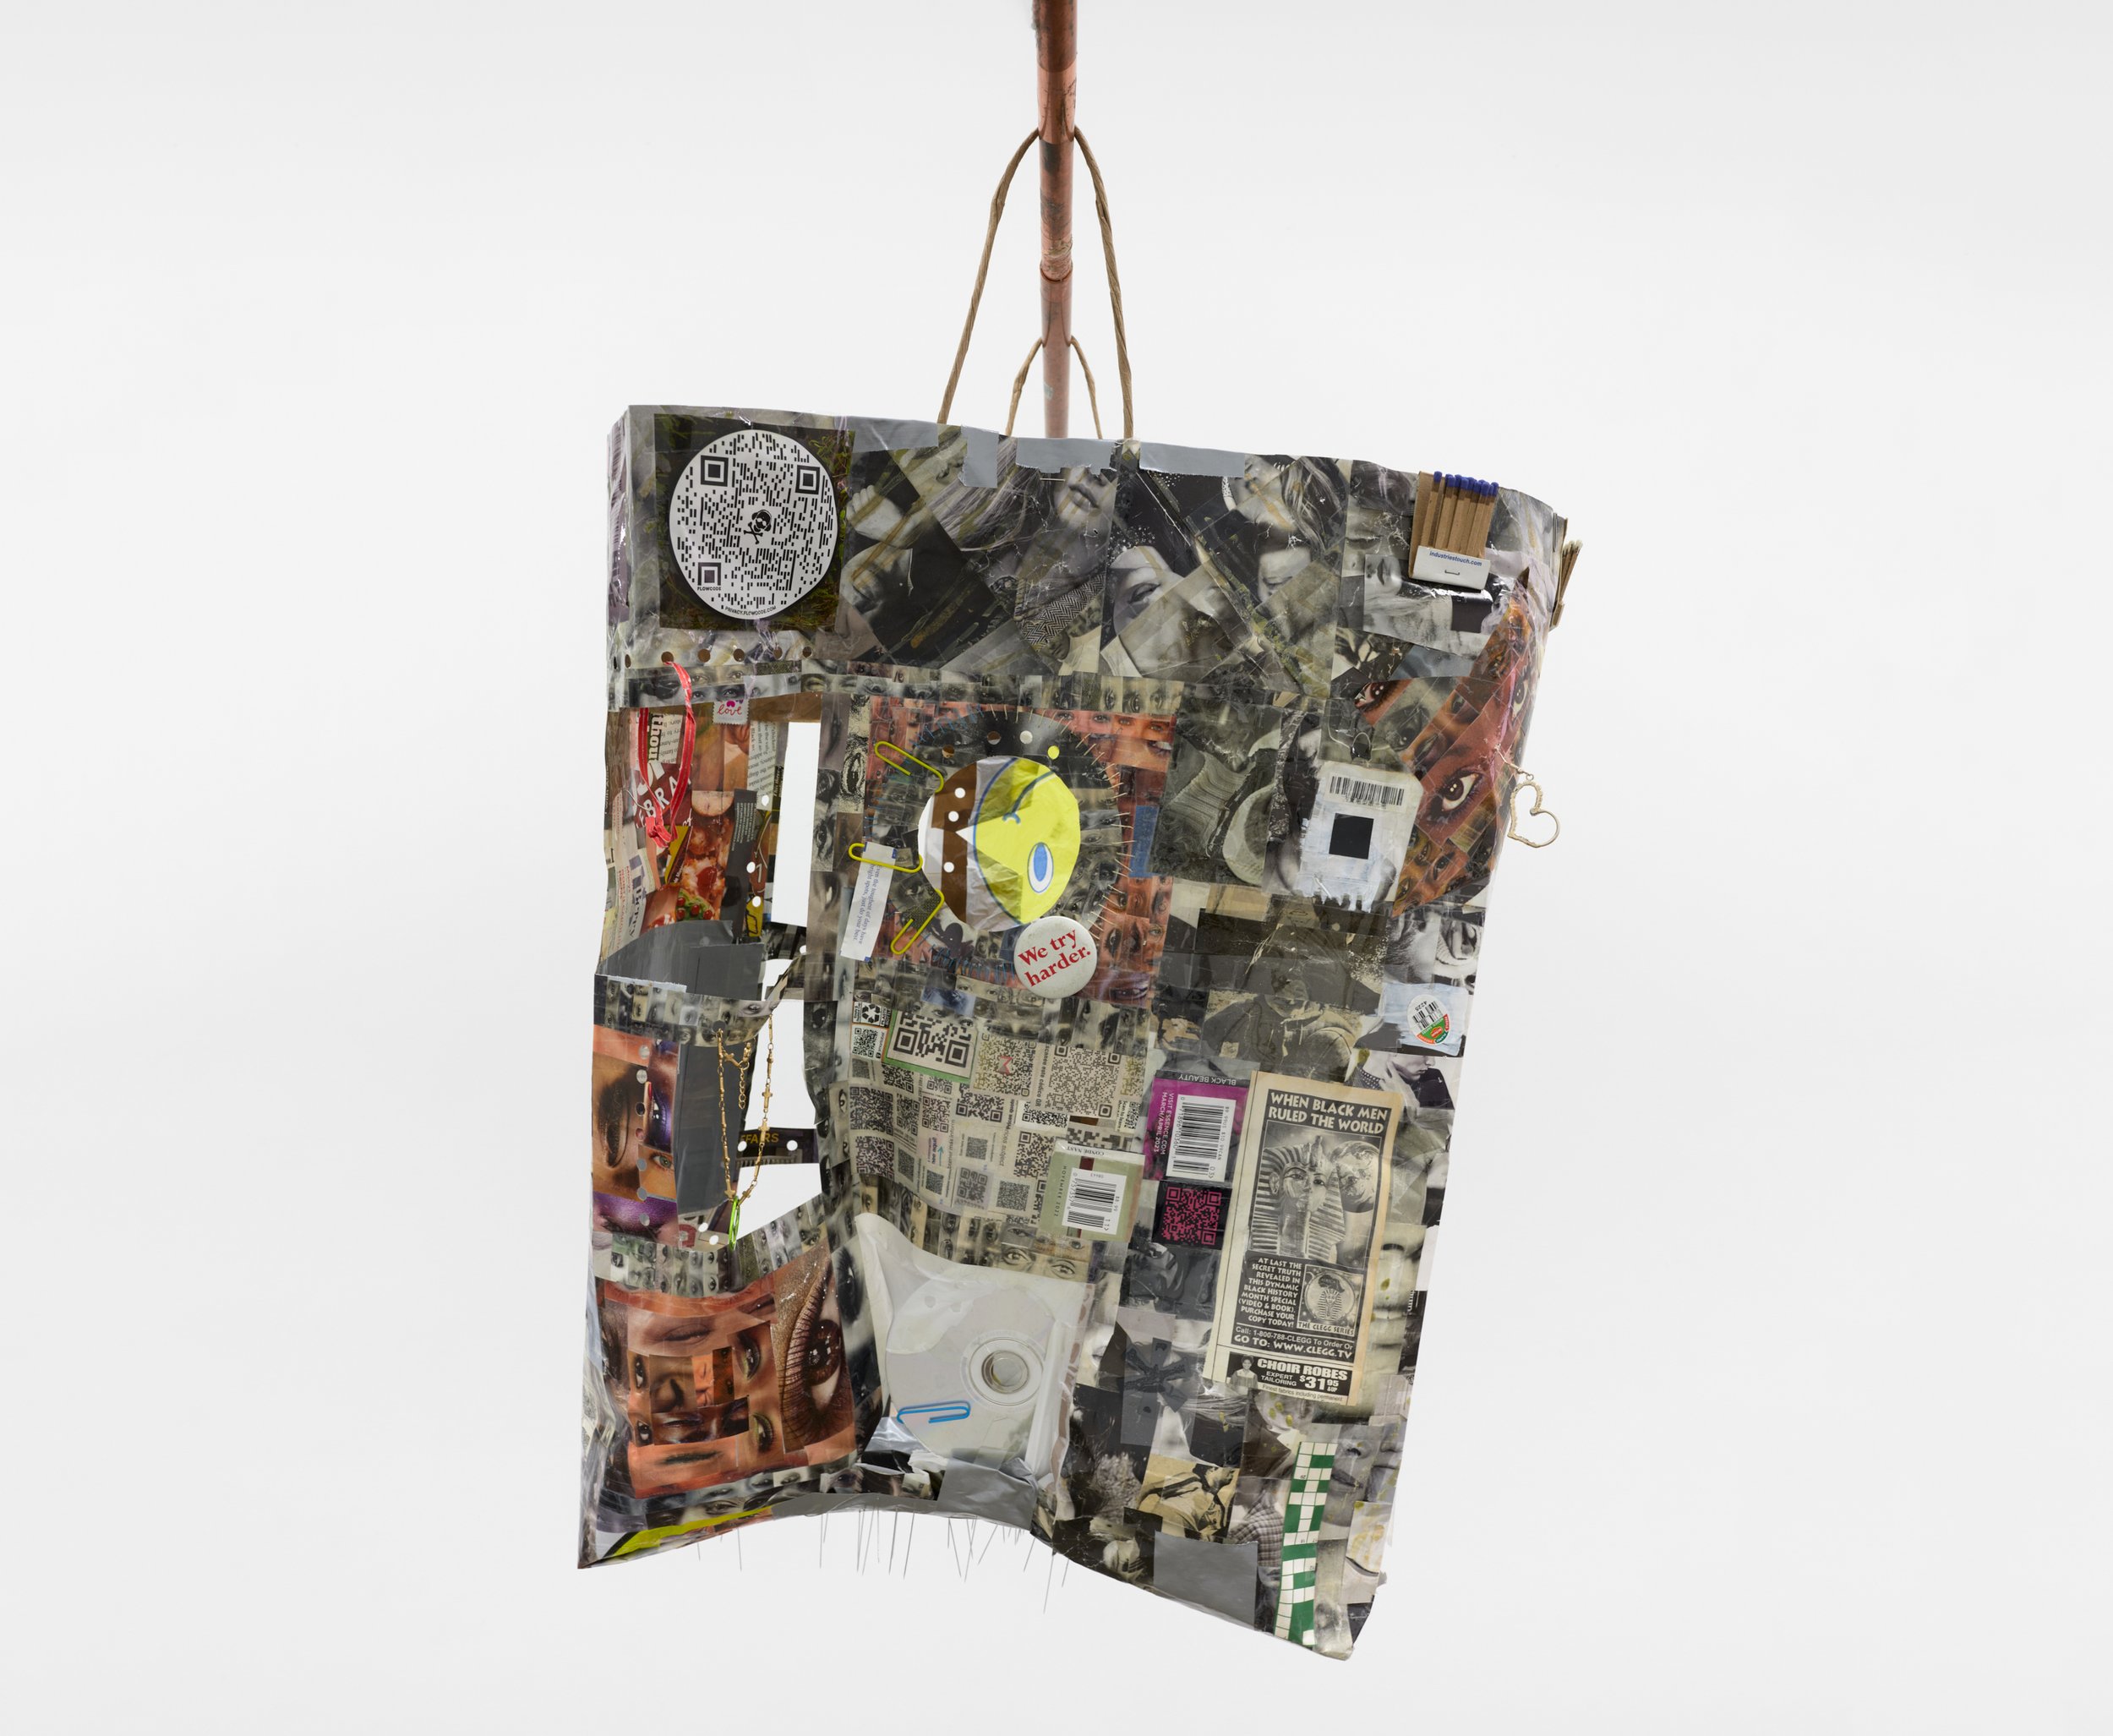  Elzie Williams III  If I Ruled The World (Time Traveler Bag) , 2023 (side 1) magazines, found qr codes, clear tape, found objects, copper  26 x 18 x 6 inches (66 x 46 x 15 cm) EW9 